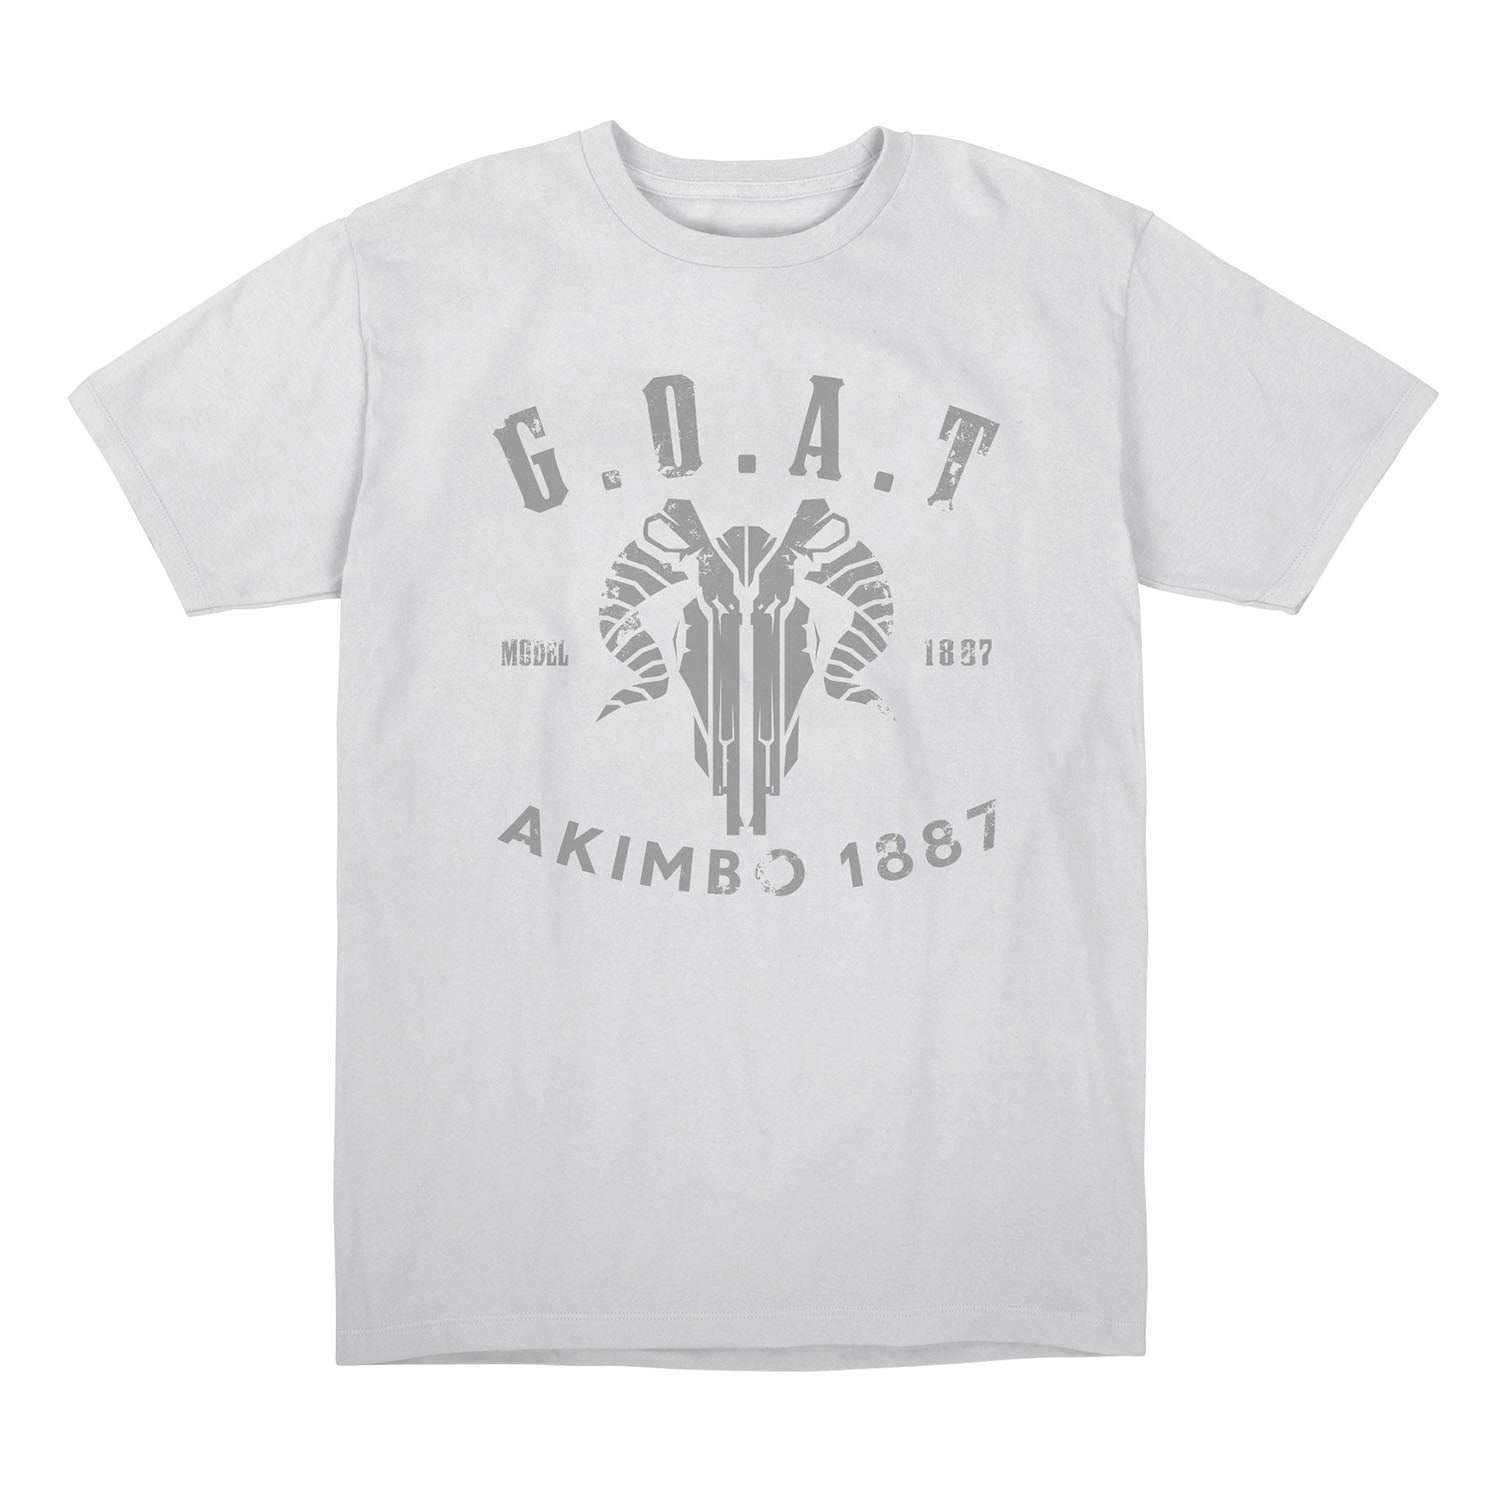 Call of Duty Akimbo 1887 White T-Shirt - Front View